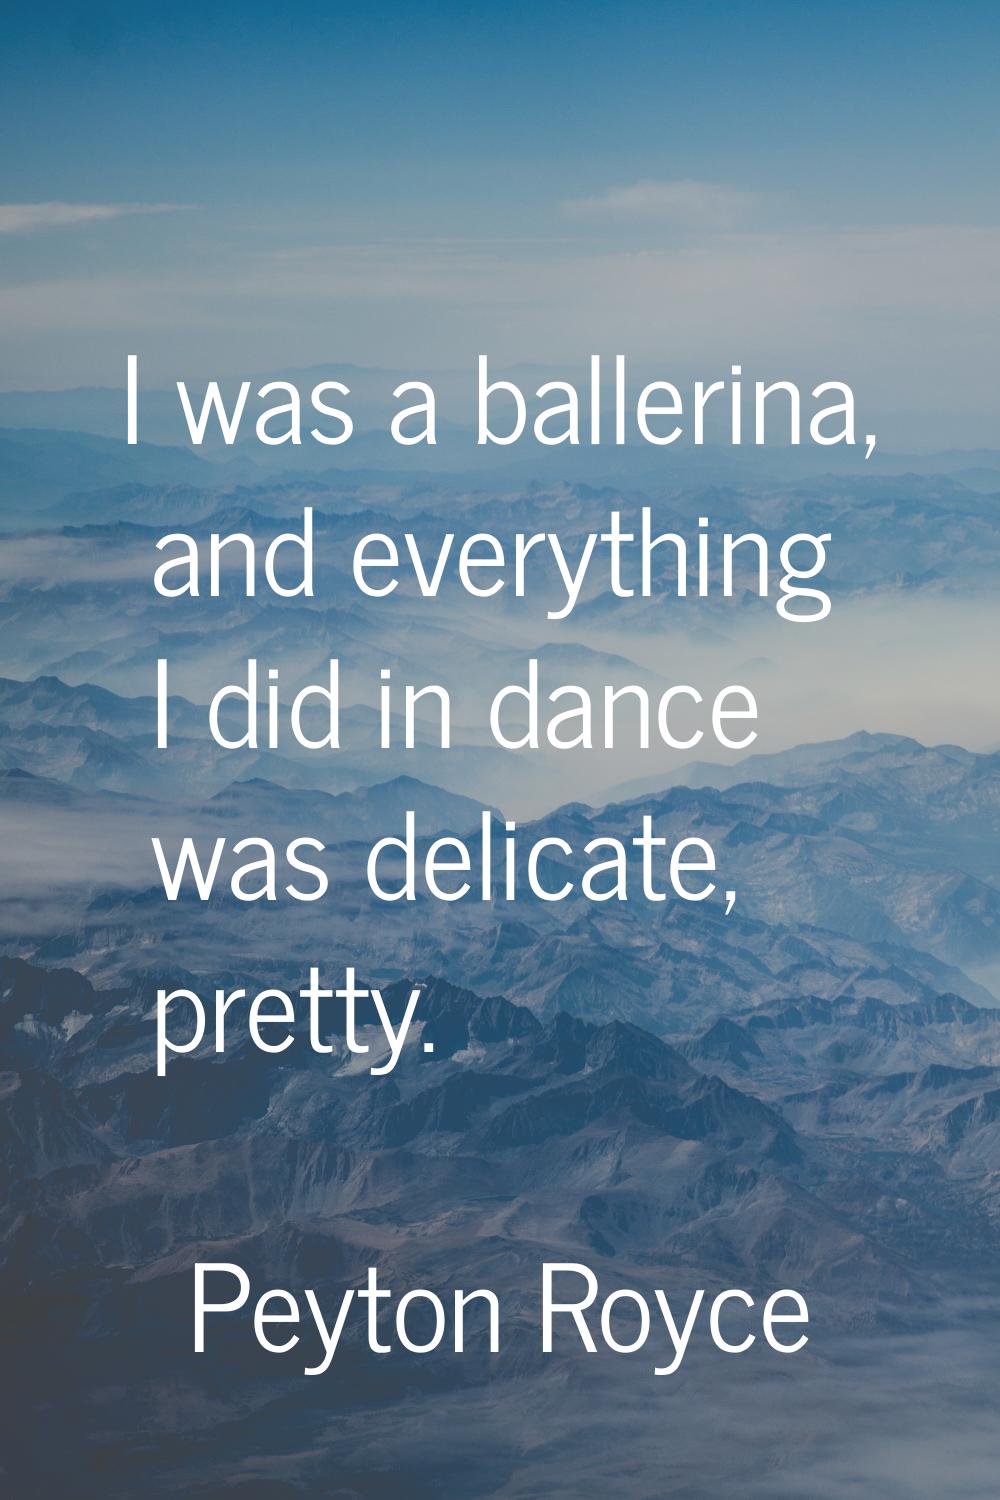 I was a ballerina, and everything I did in dance was delicate, pretty.